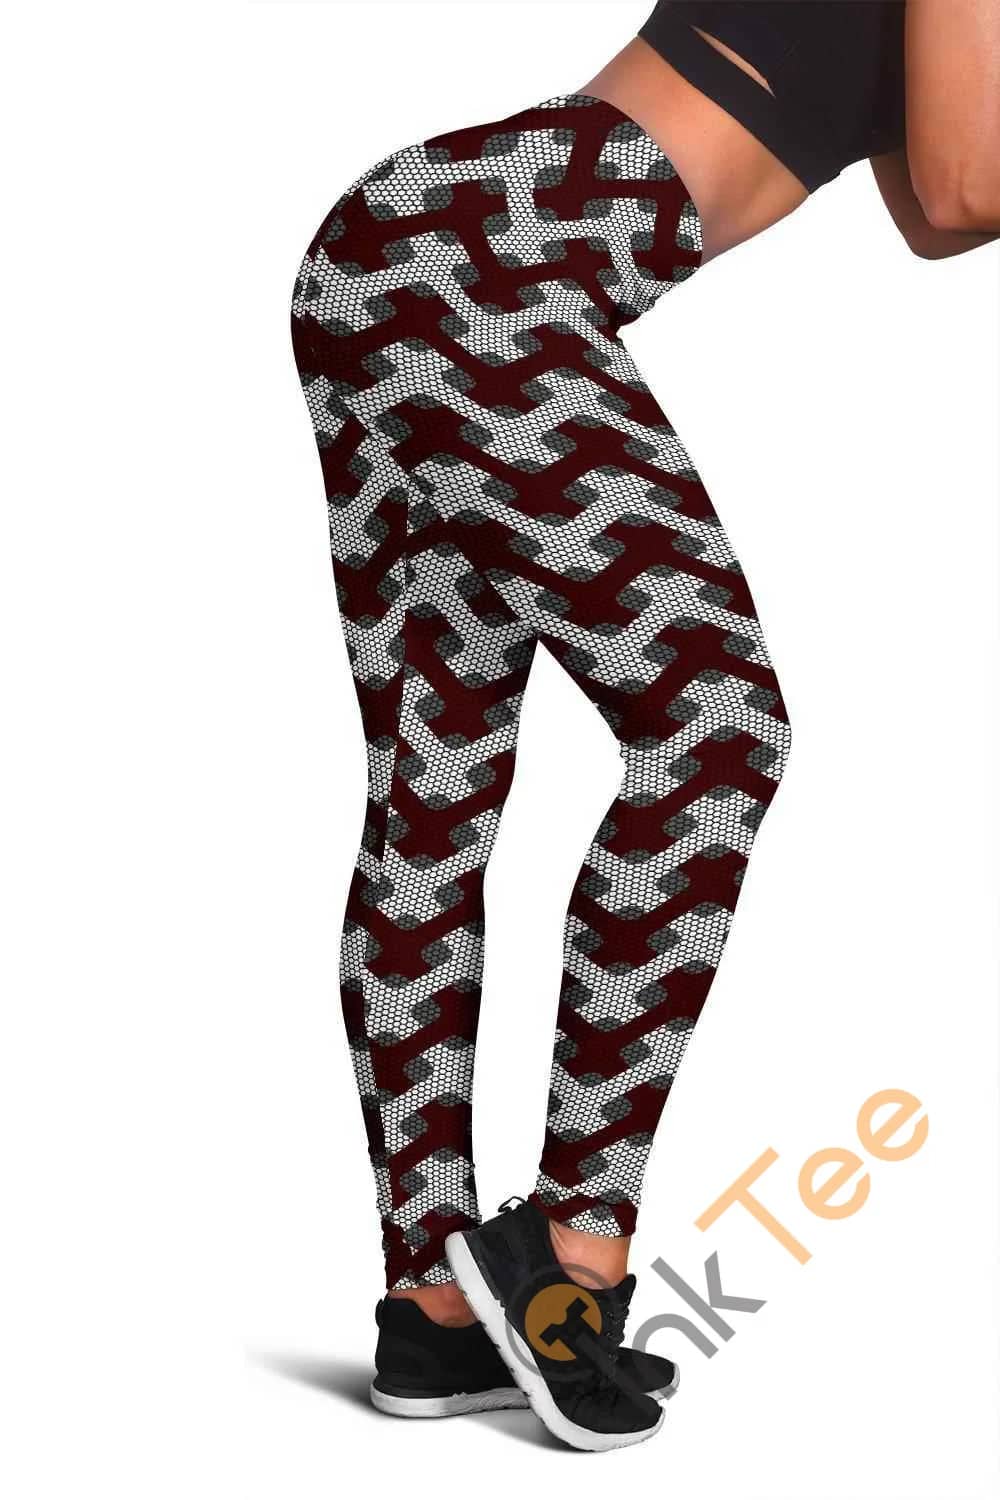 Texas A&M Aggies Inspired Liberty 3D All Over Print For Yoga Fitness Fashion Women's Leggings